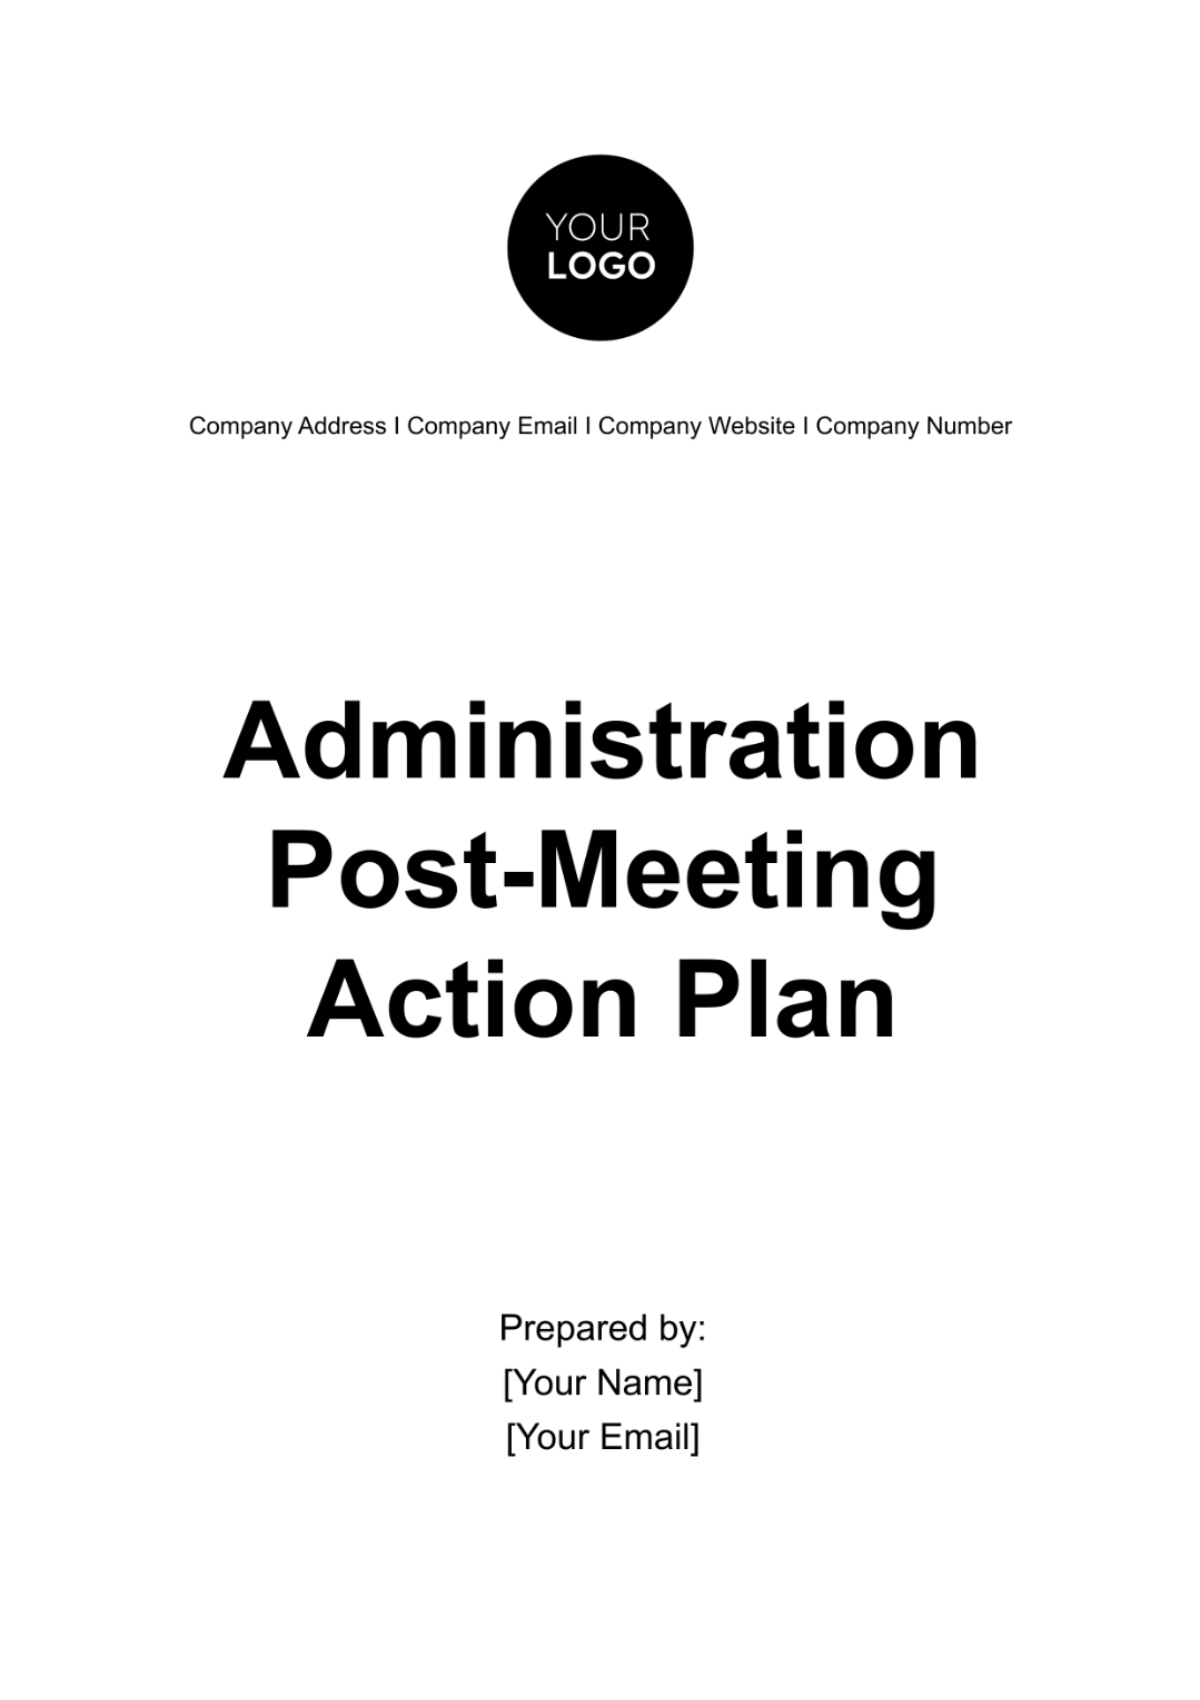 Free Administration Post-Meeting Action Plan Template